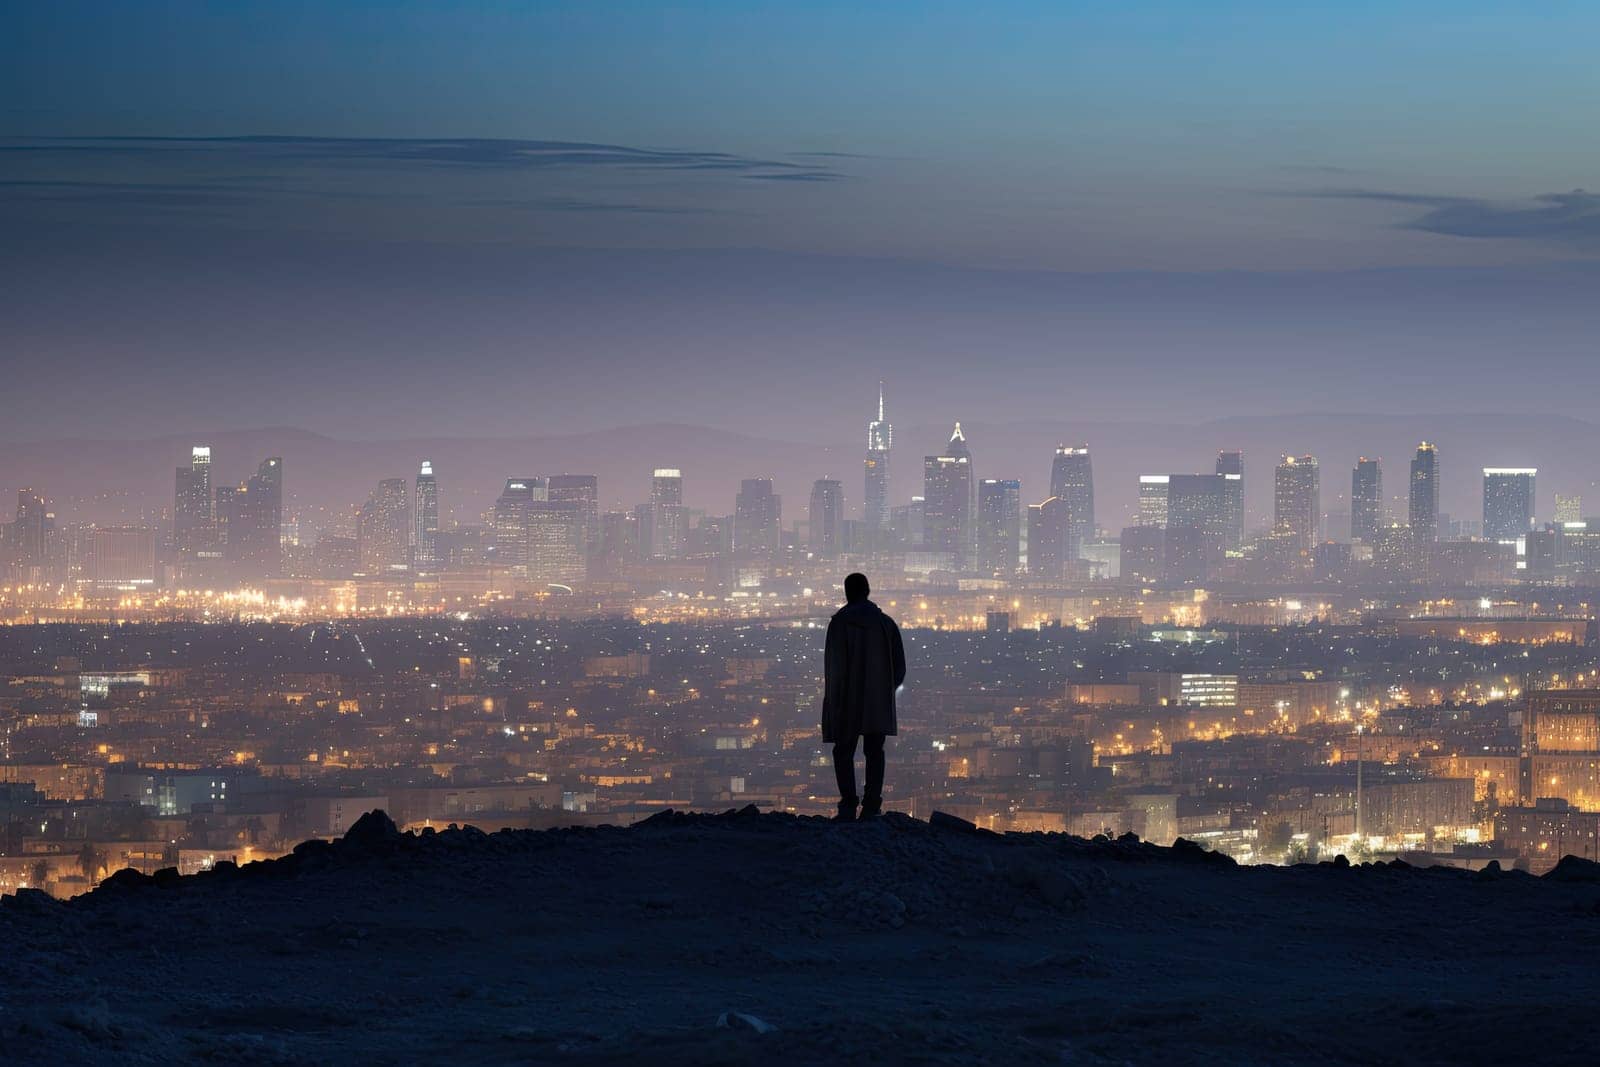 Overlooking the Vast Urban Landscape: A Man Standing Triumphantly on a Hilltop